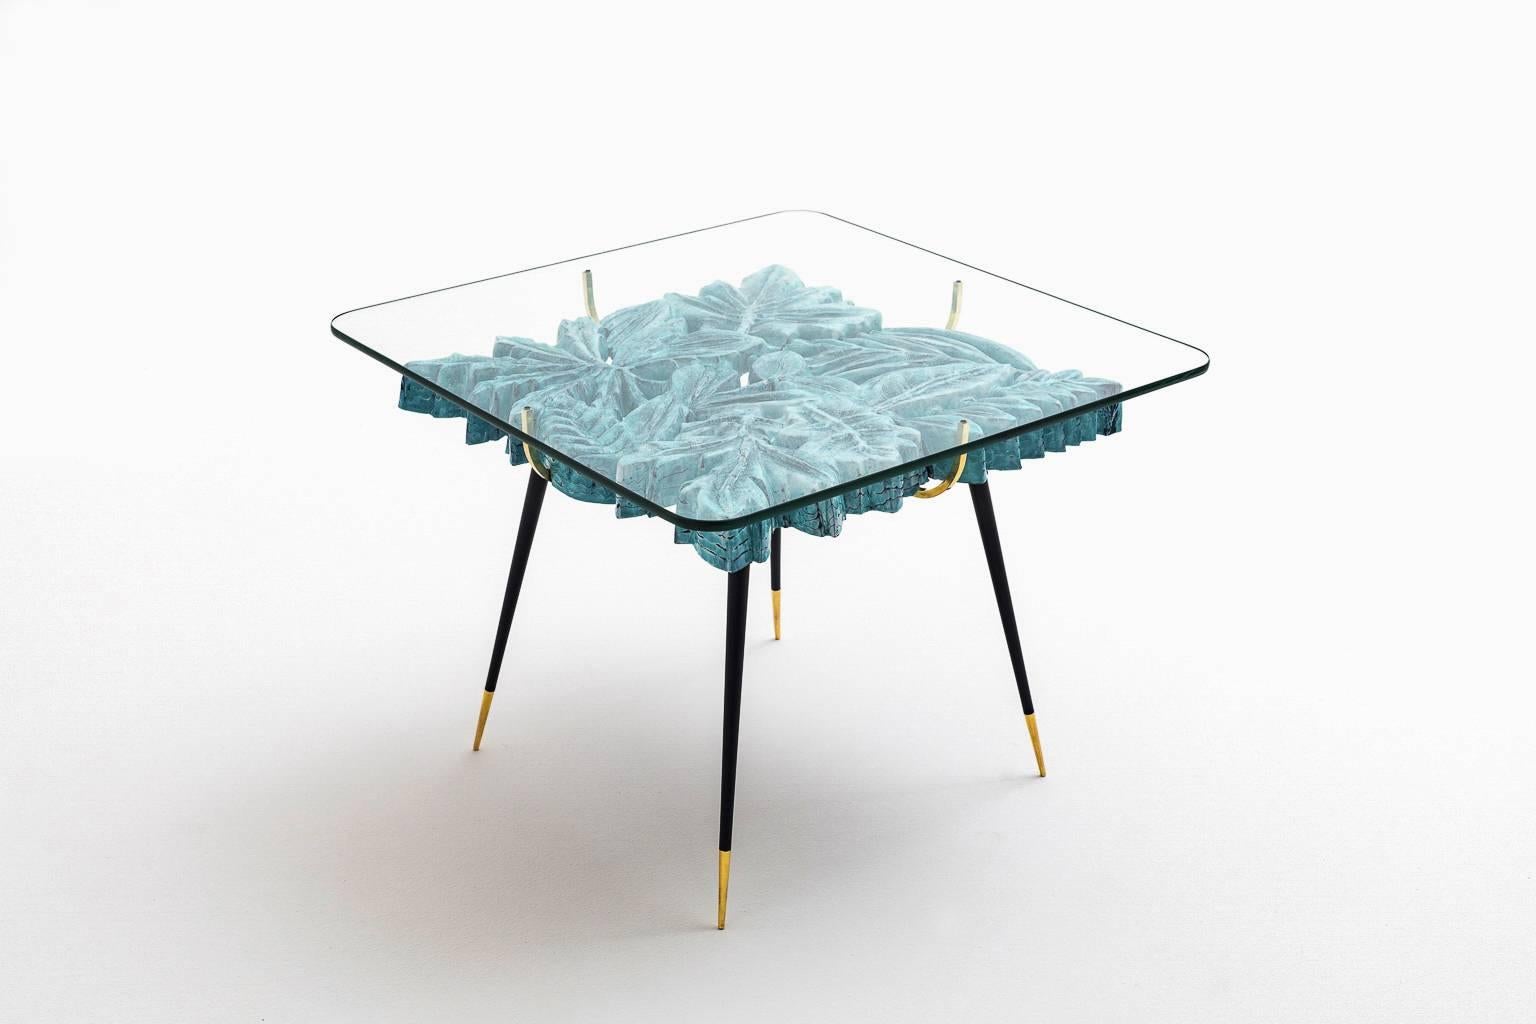 Beautiful occasional table in enameled ceramic by San Polo, Venice Italy 1950s made from the most wonderful handcrafted ceramics in the form of leaves in splendid colors. Nice contrast with the very elegant legs in black lacquer with chic brass